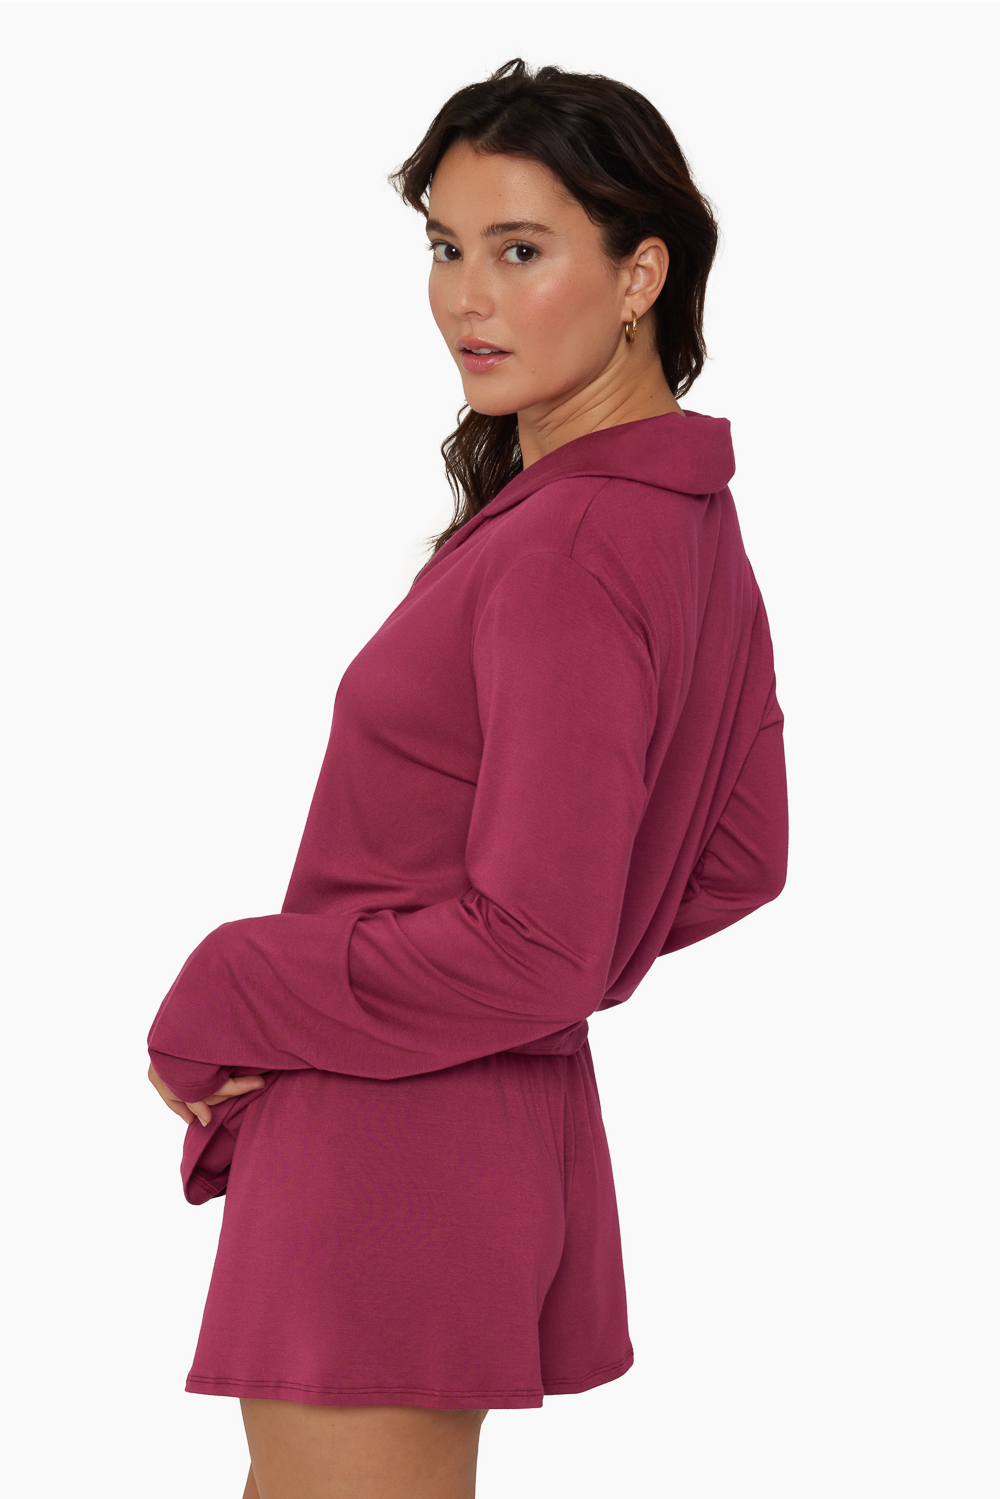 SET™ SLEEP BUTTON DOWN IN ORCHID